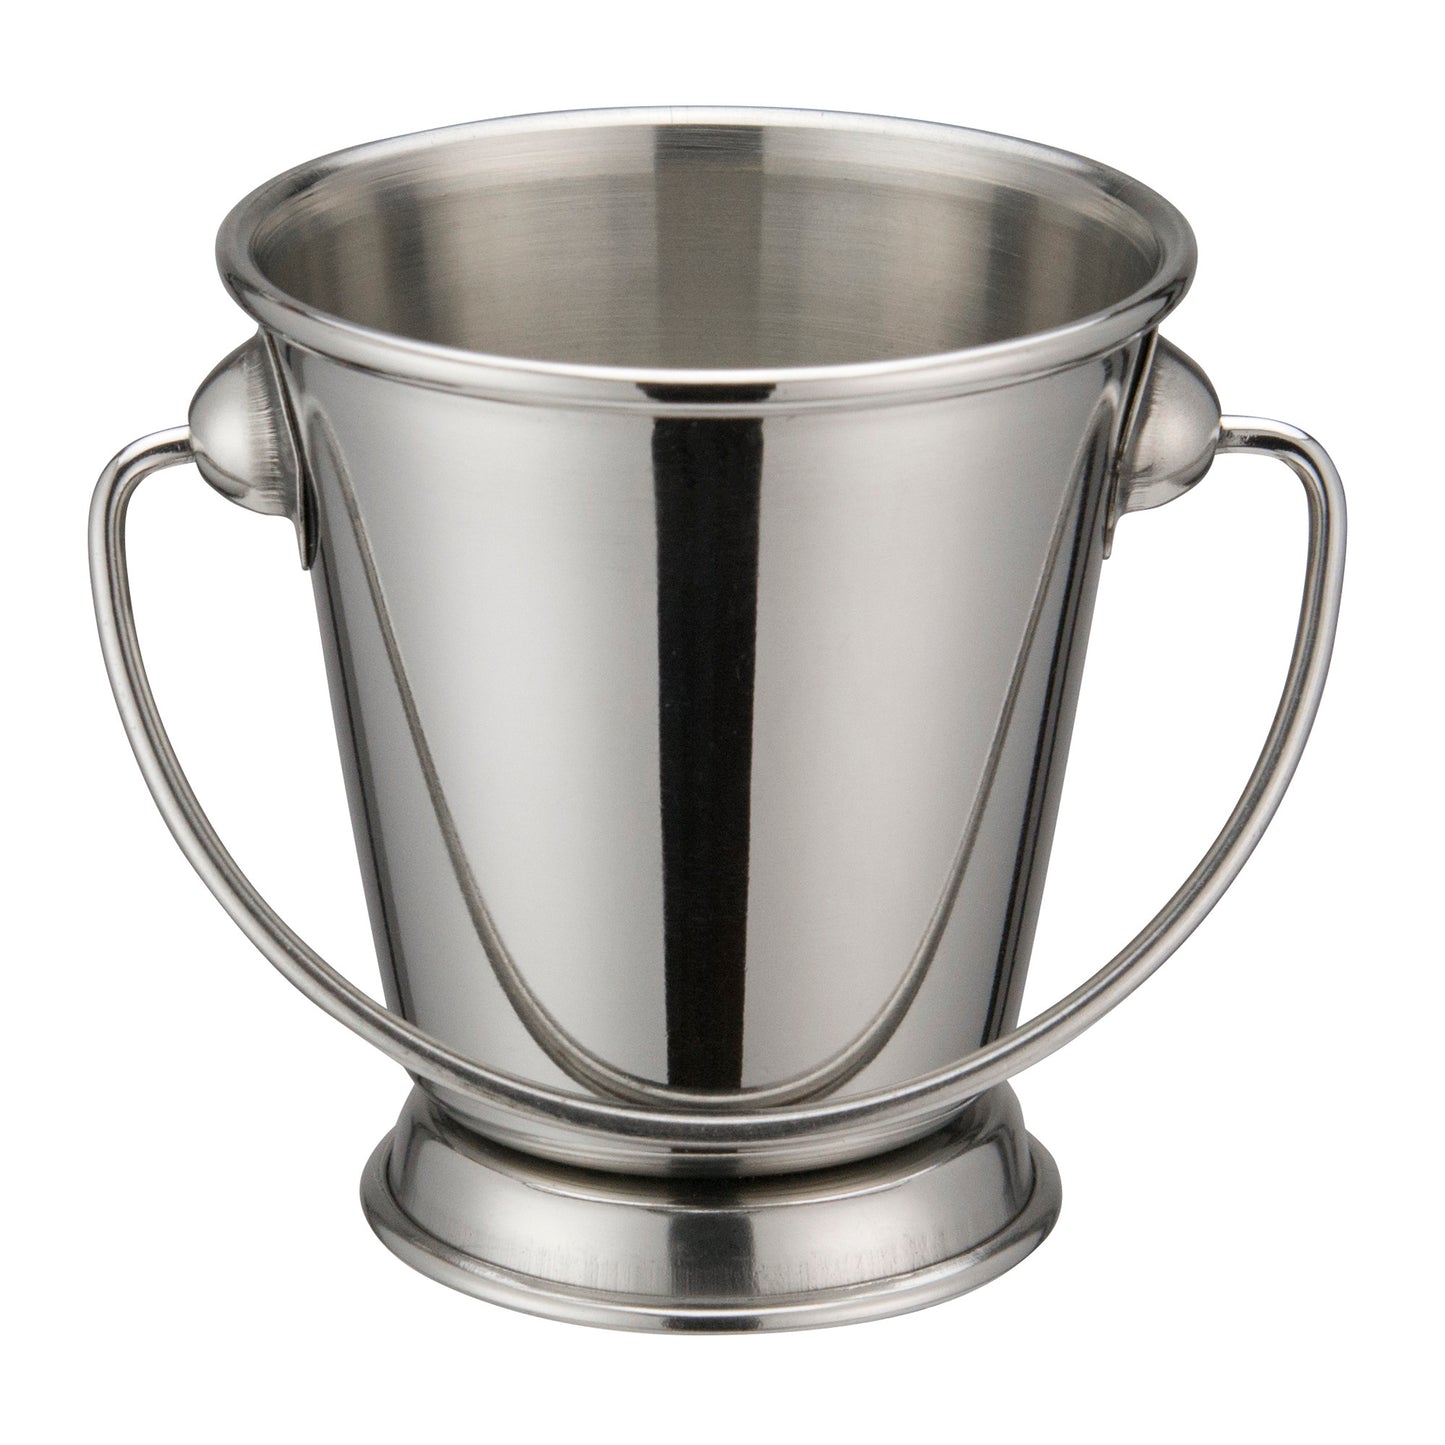 DDSA-104S - Stainless Steel Mini Pail - Smooth, 3"